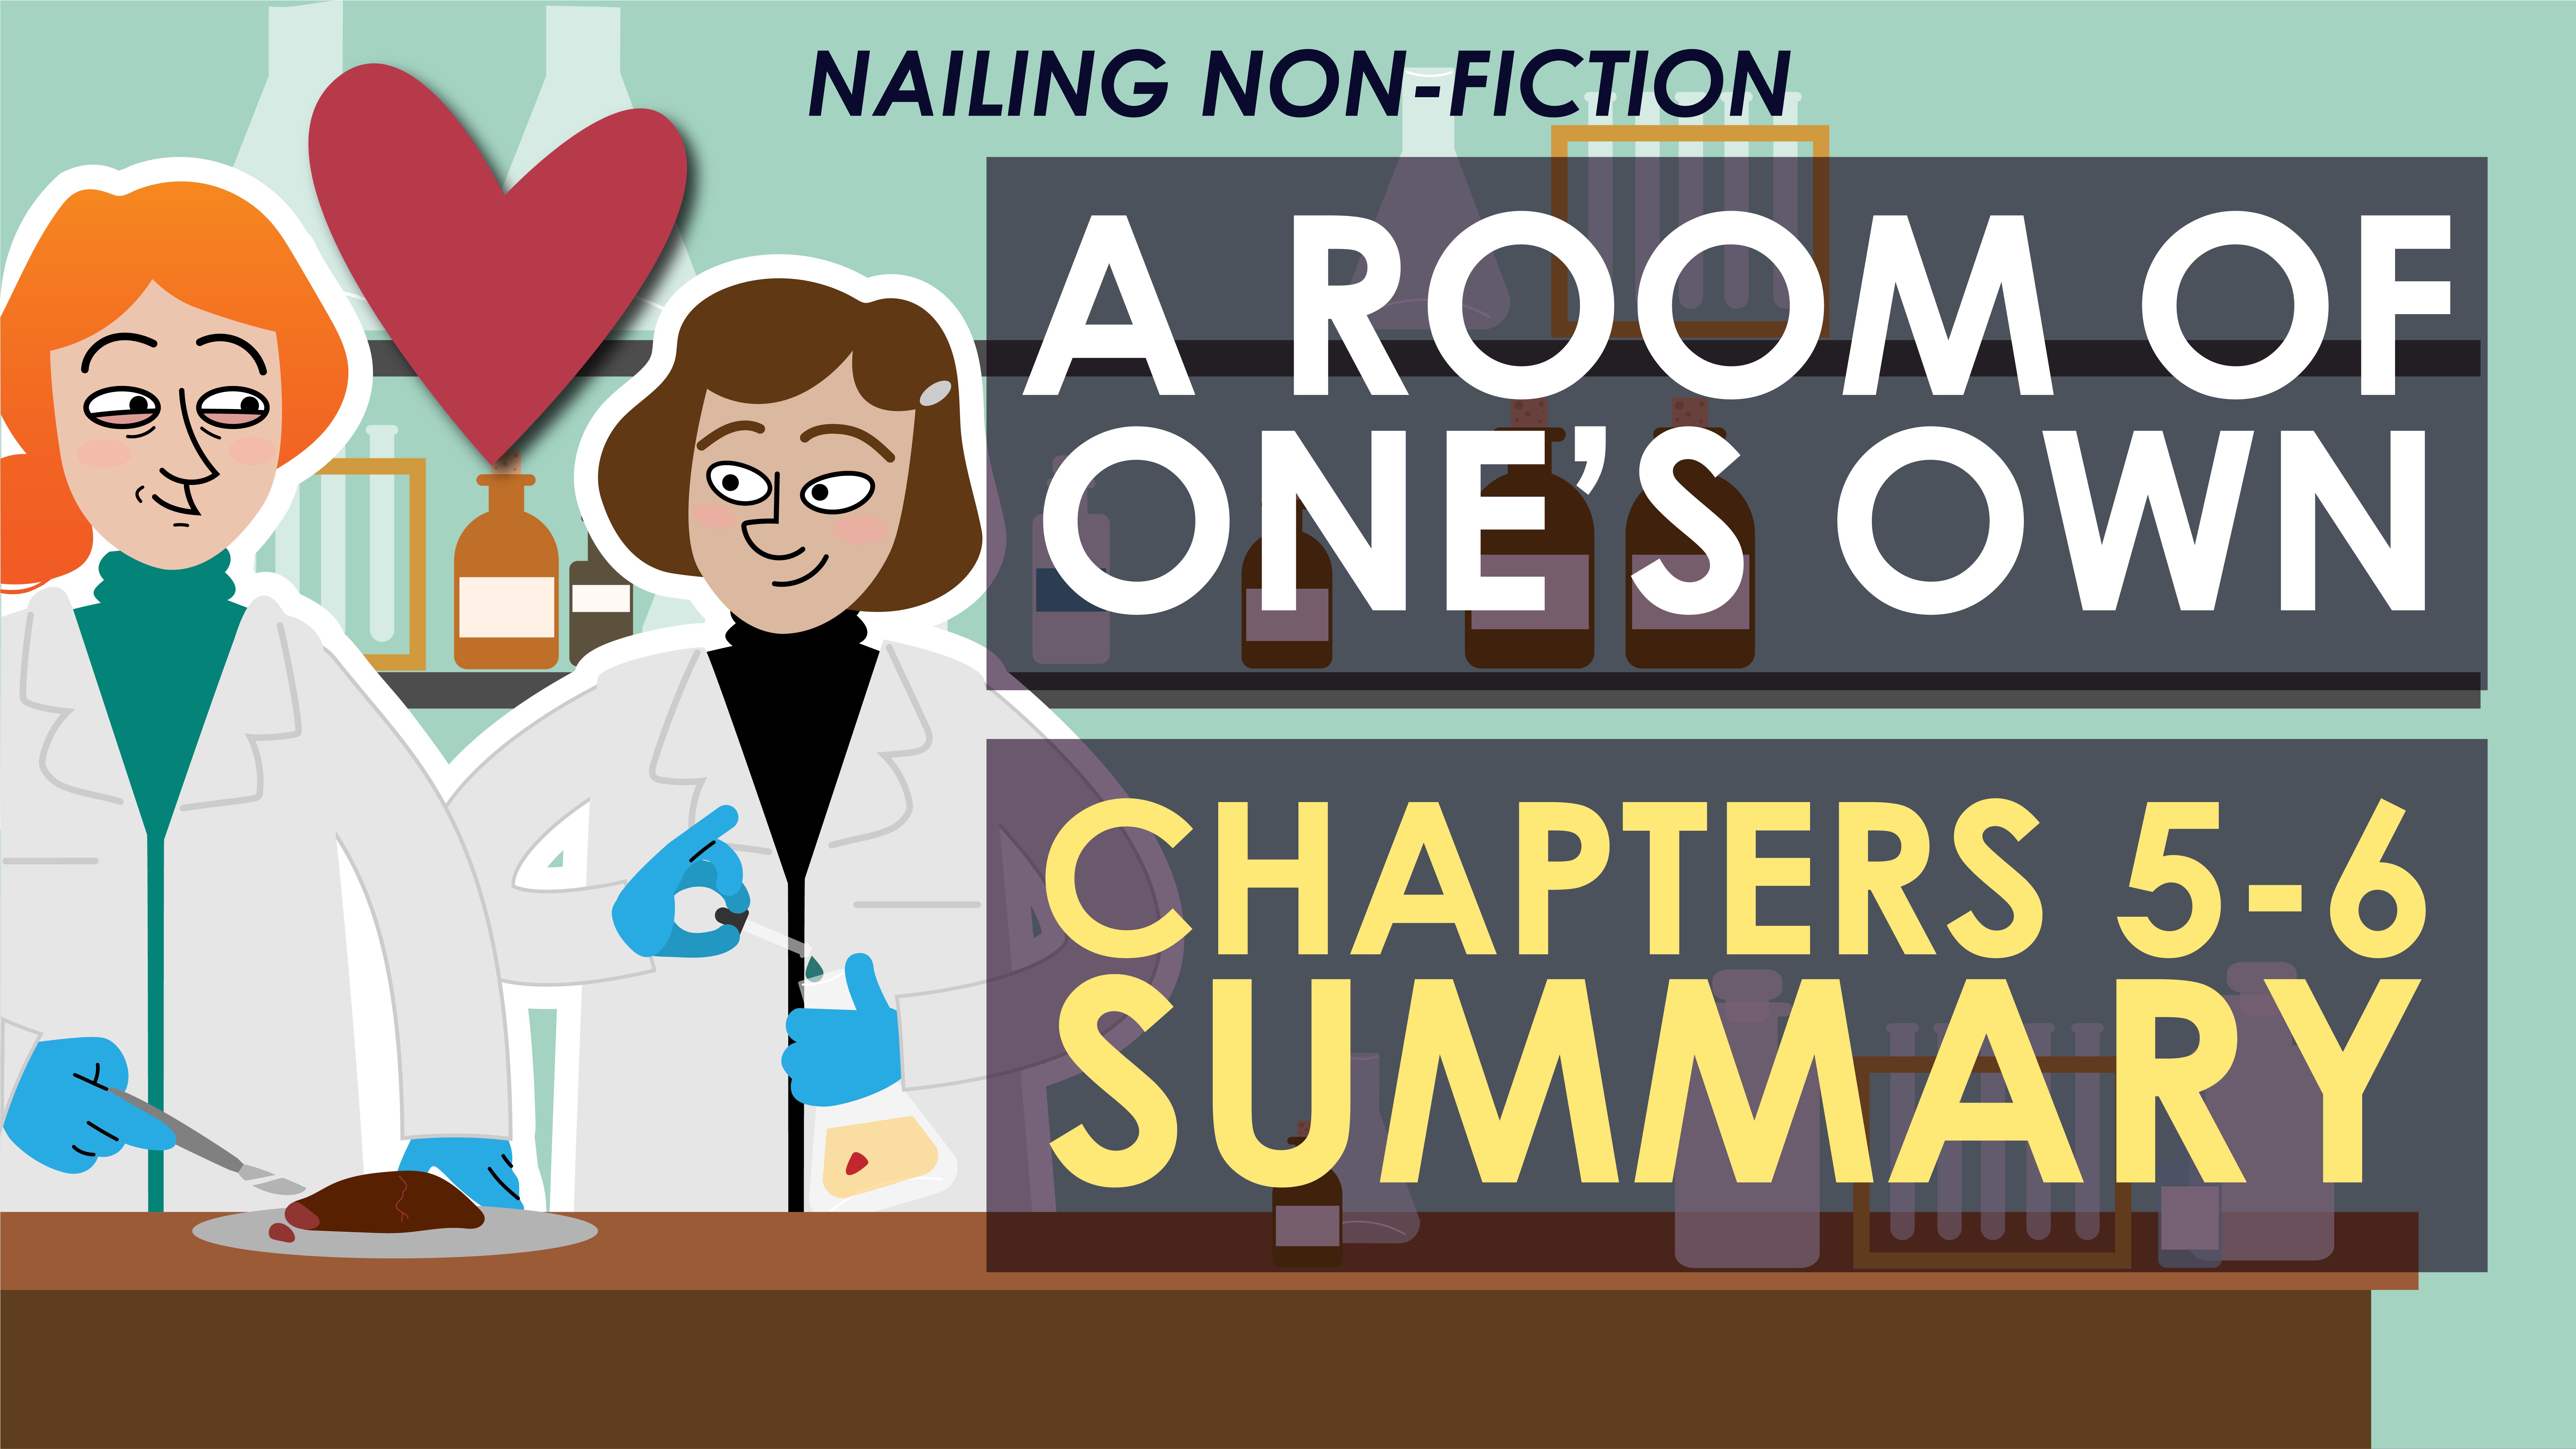 A Room of One's Own - Chapters 5-6 Summary - Nailing Non-Fiction Series